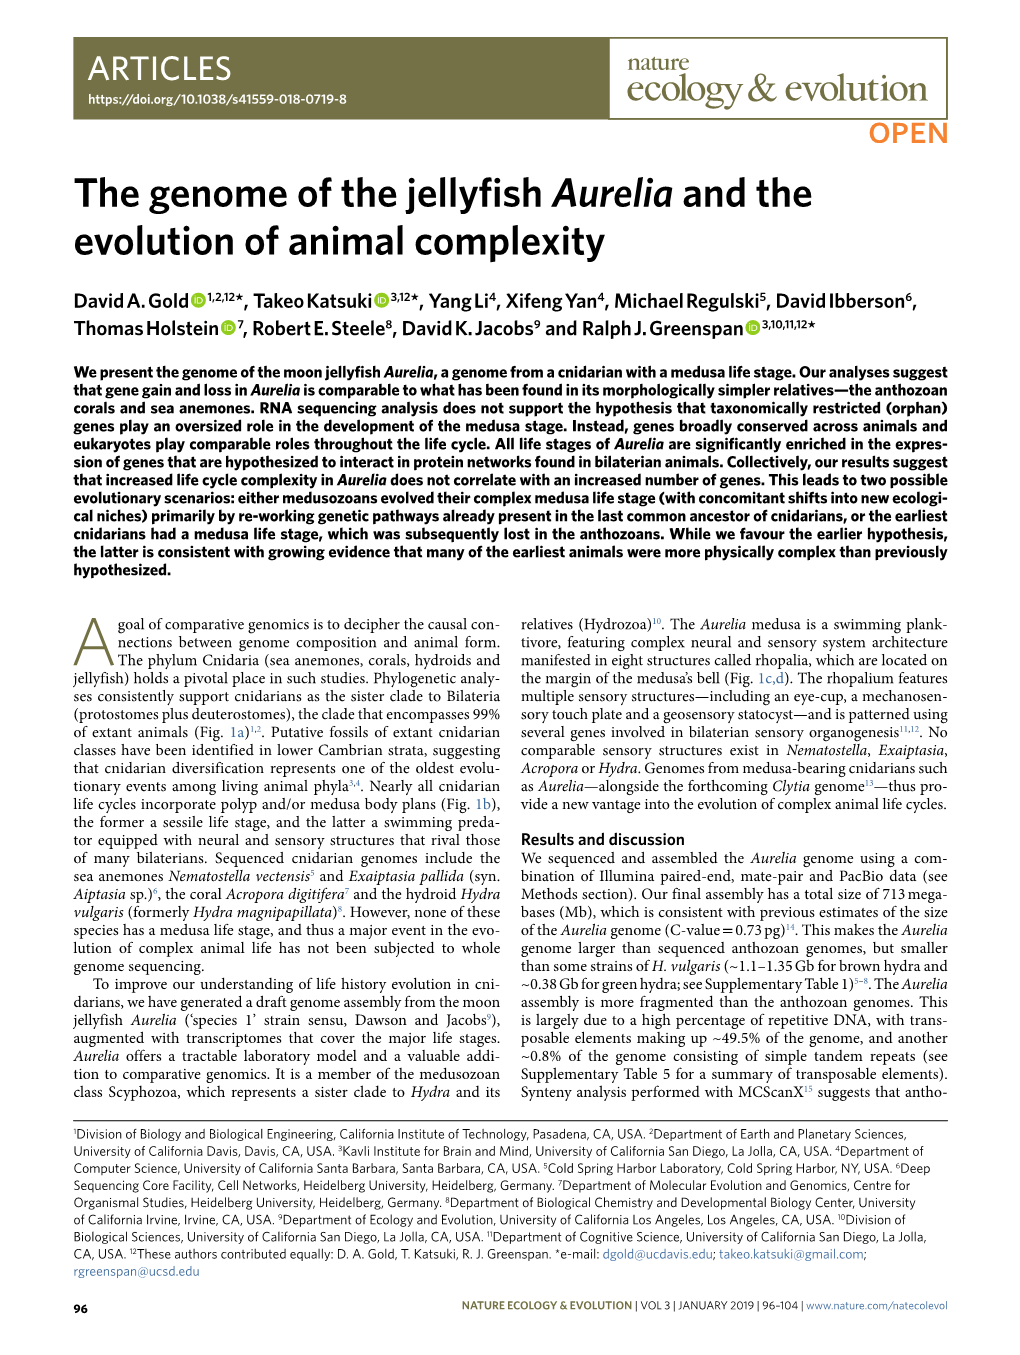 The Genome of the Jellyfish Aurelia and the Evolution of Animal Complexity